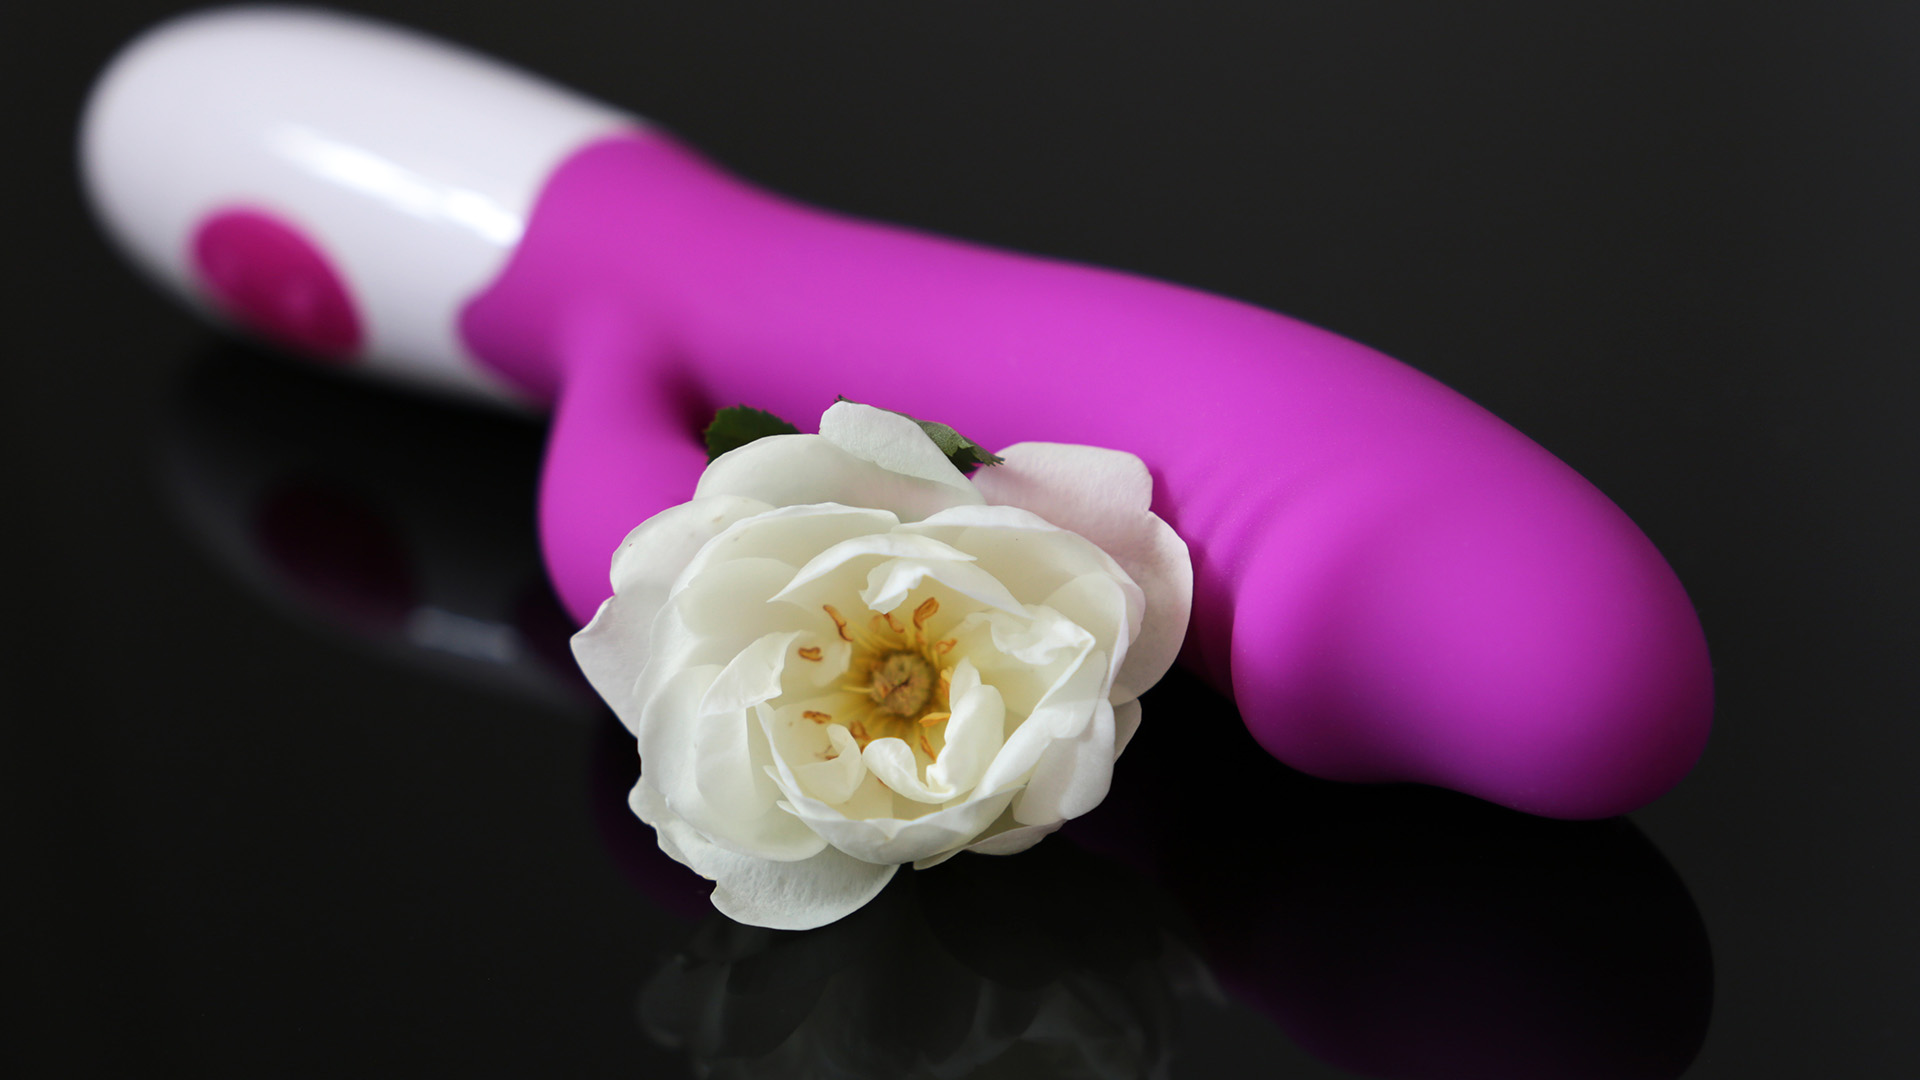 Pink g spot vibrator with white handle next to beige flower, both on a black reflective surface.